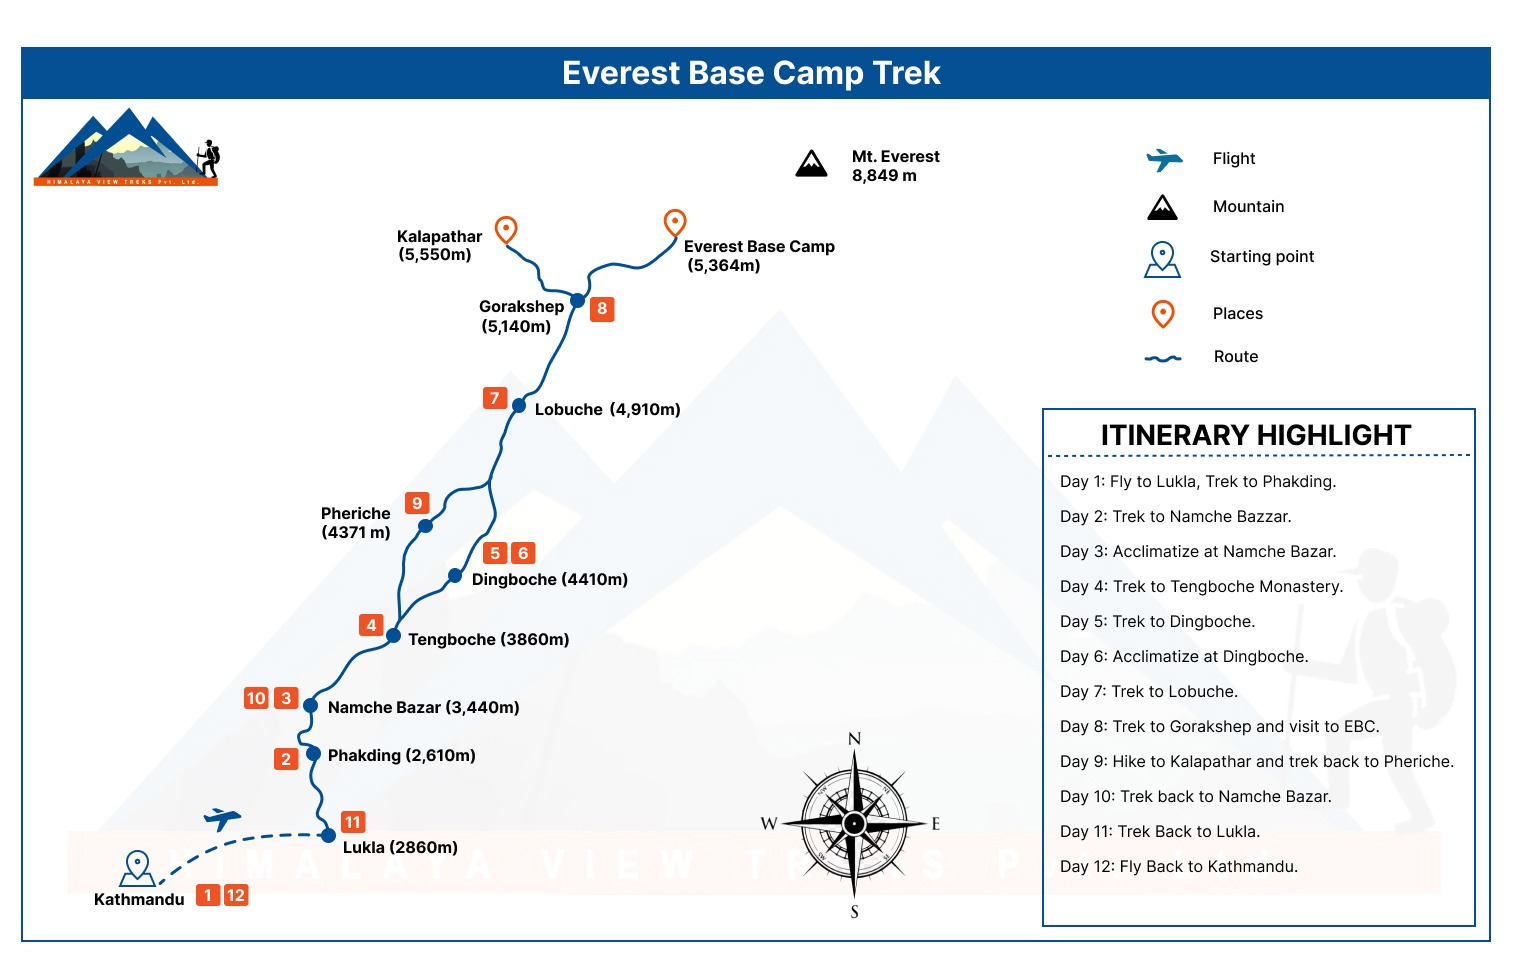 Route Map Of Everest Base Camp Trek